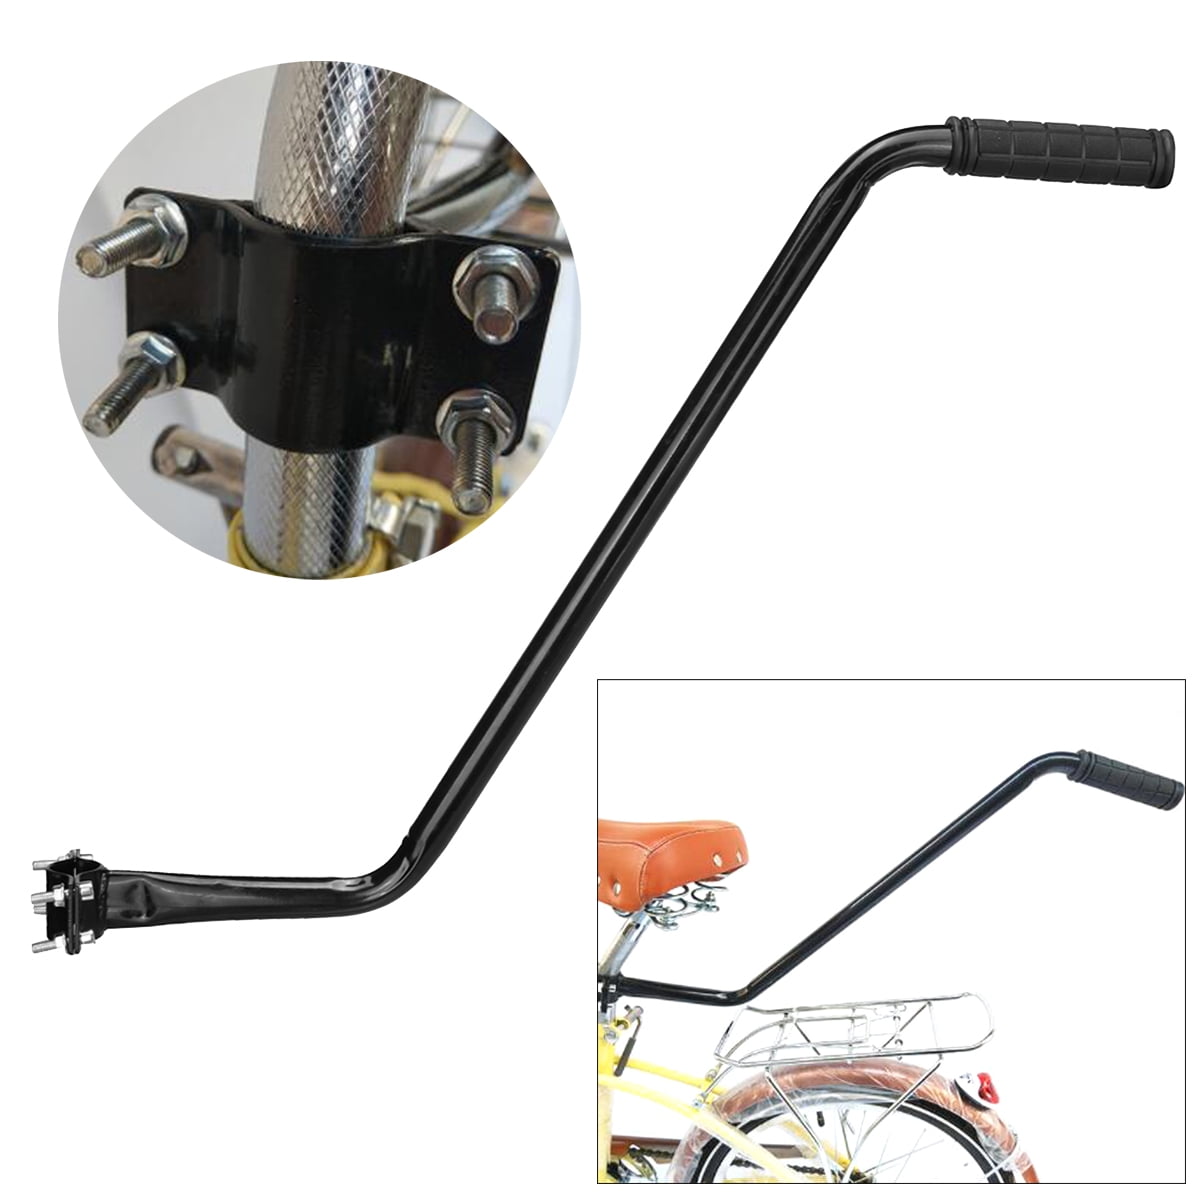 Bike Push Handle Bar Safety Pole Bike Training Handle Child's Bike Balance Aid Safety Pole Control For Training Child Bicycle Black Children's Bikes Accessories Cycling 